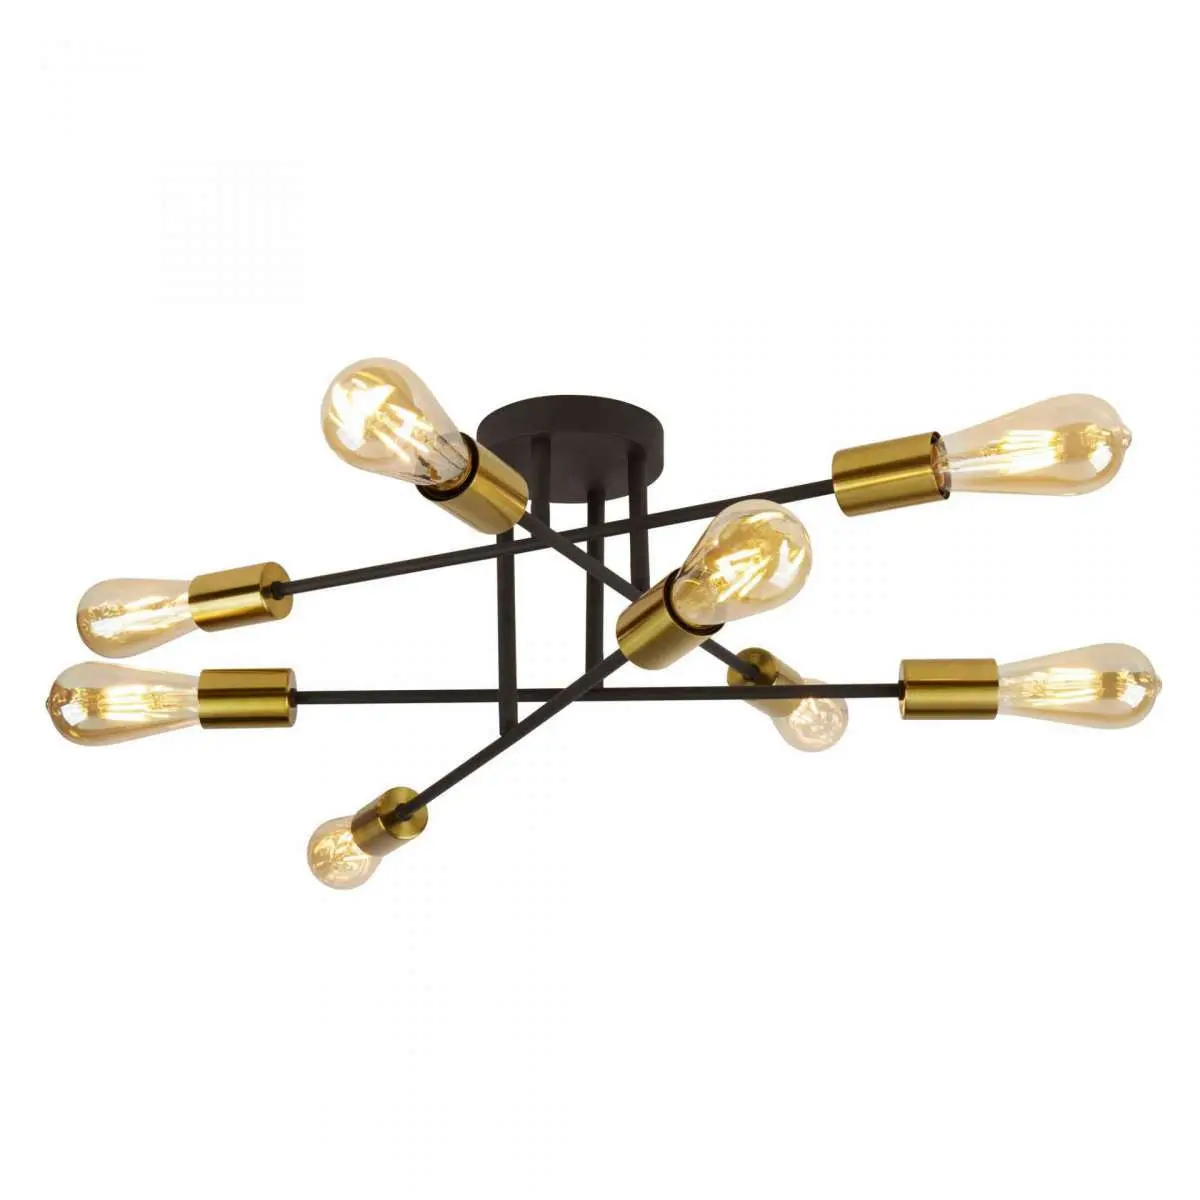 Armstrong 8 Light Ceiling Light Black And Satin Brass